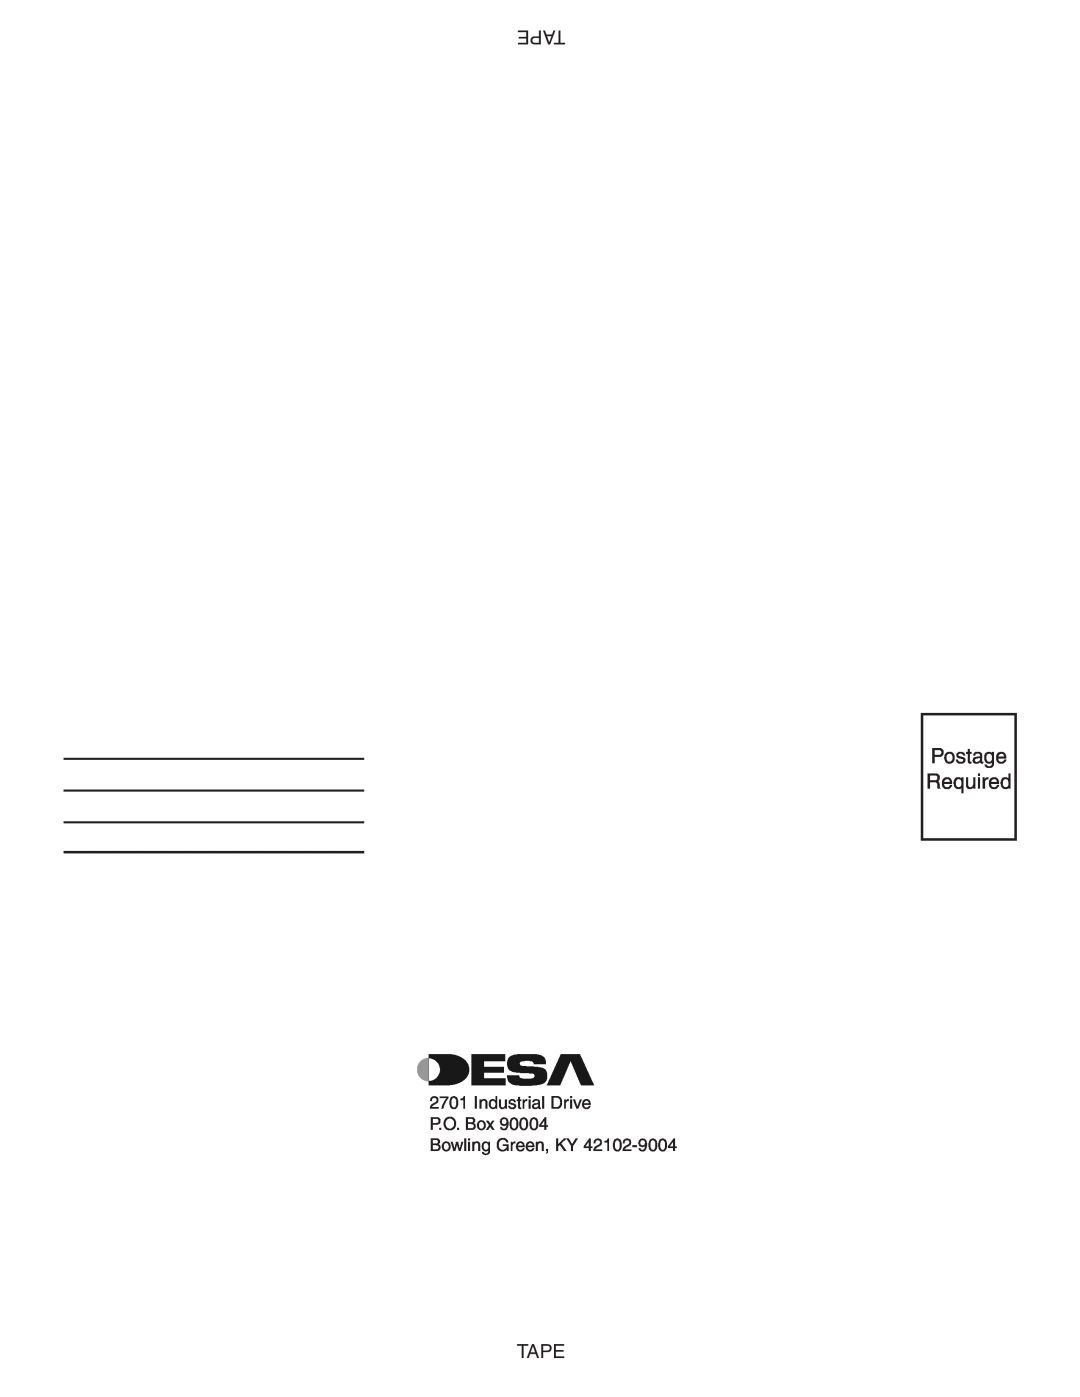 Desa BCS18, BCS24, BCS30 installation manual Postage Required, Tape, Industrial Drive P.O. Box Bowling Green, KY, 115425-01 